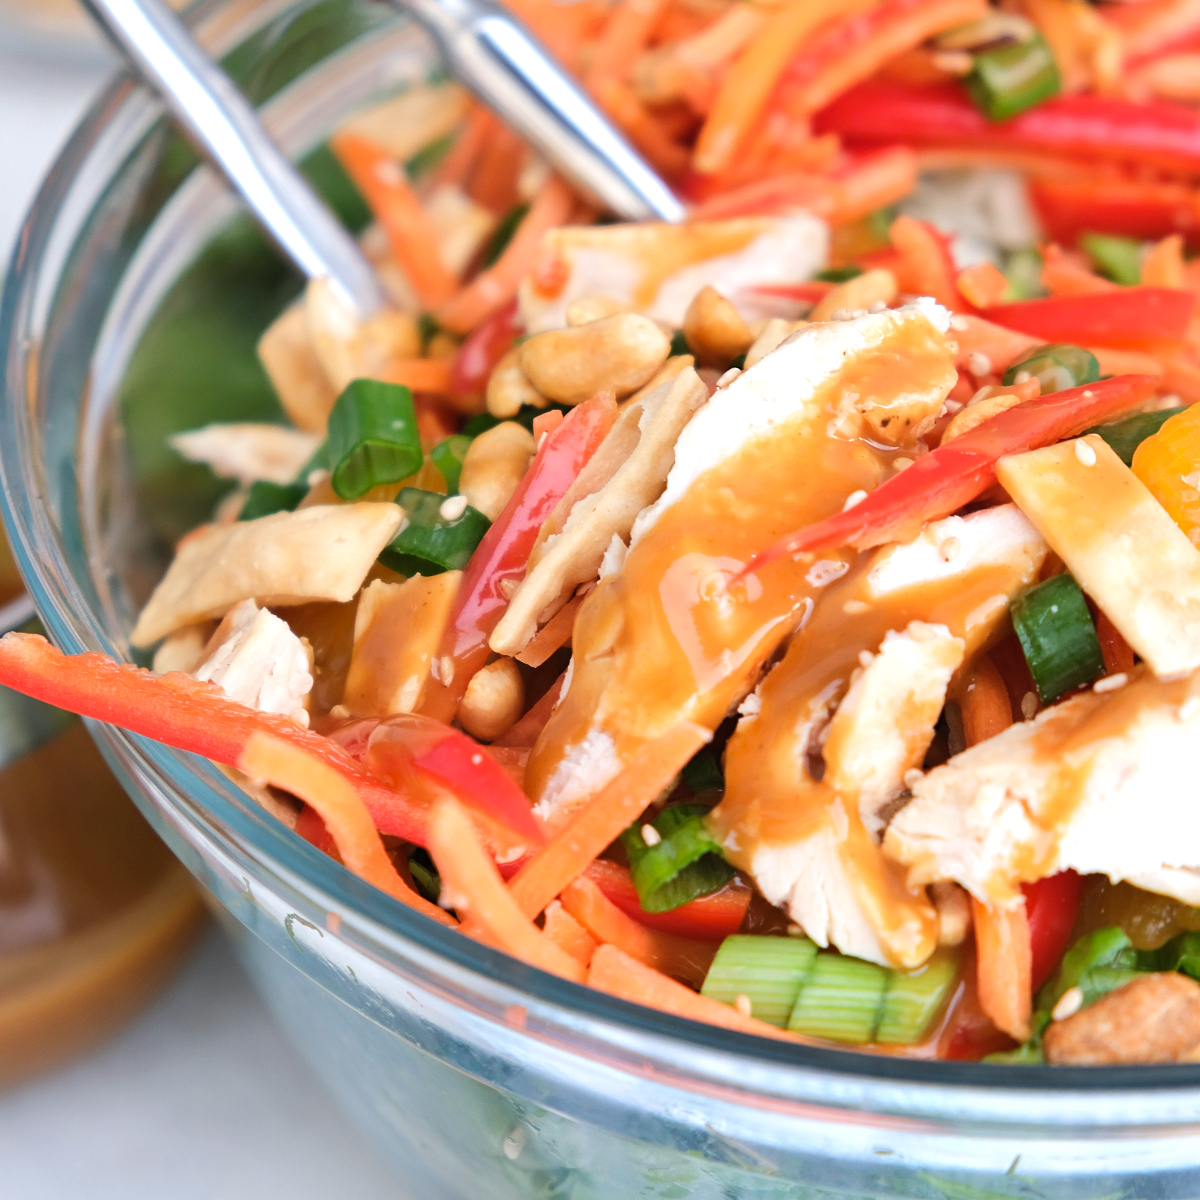 https://www.thefoodieaffair.com/wp-content/uploads/2022/01/Healthy-Chinese-Chicken-Salad-1200.jpg